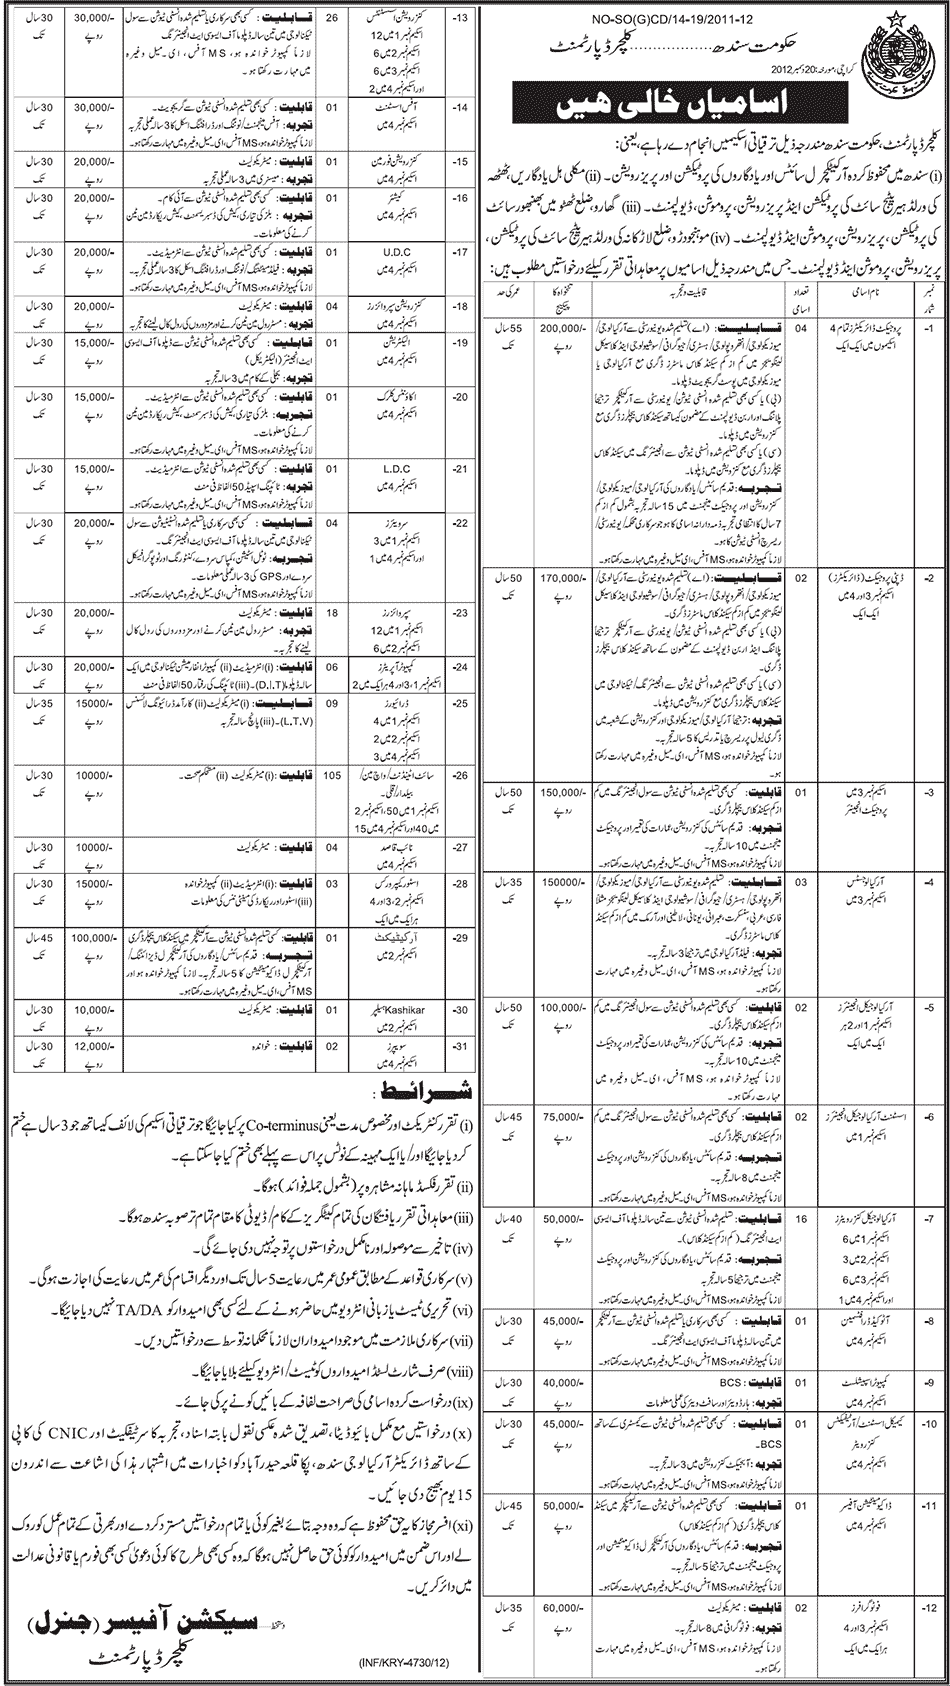 Culture Department Sindh Jobs 2012-2013 Latest Ad Daily Jang Newspaper 29-12-2012